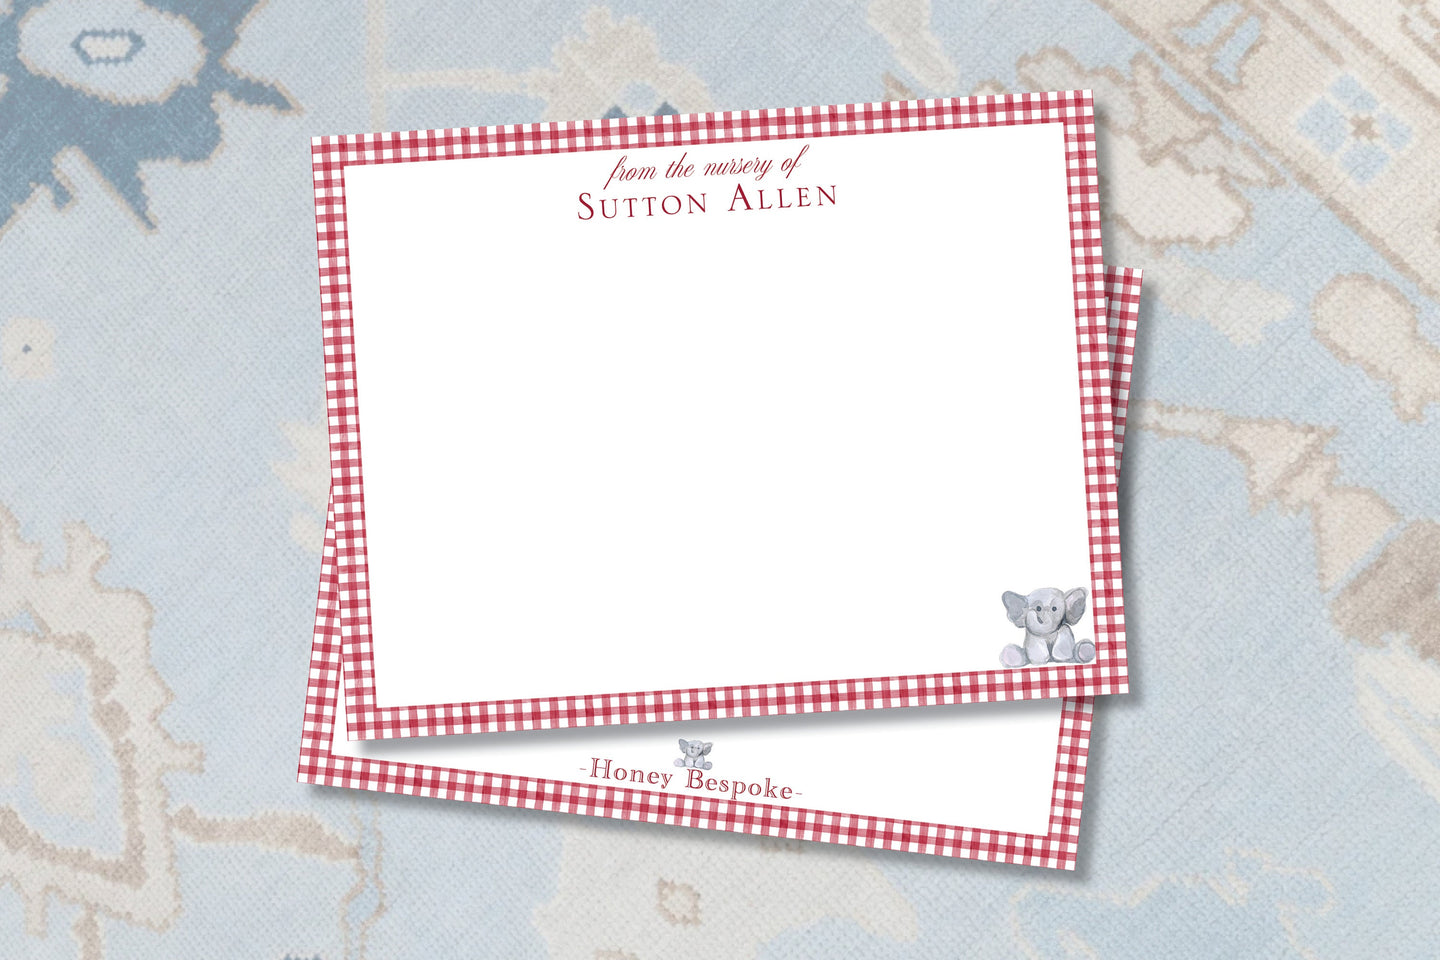 Personalized Children's Alabama Stationery/ Bama / Baby Stationery Gift/ Preppy Stationery / Thank You Notes / Stationery / Roll Tide